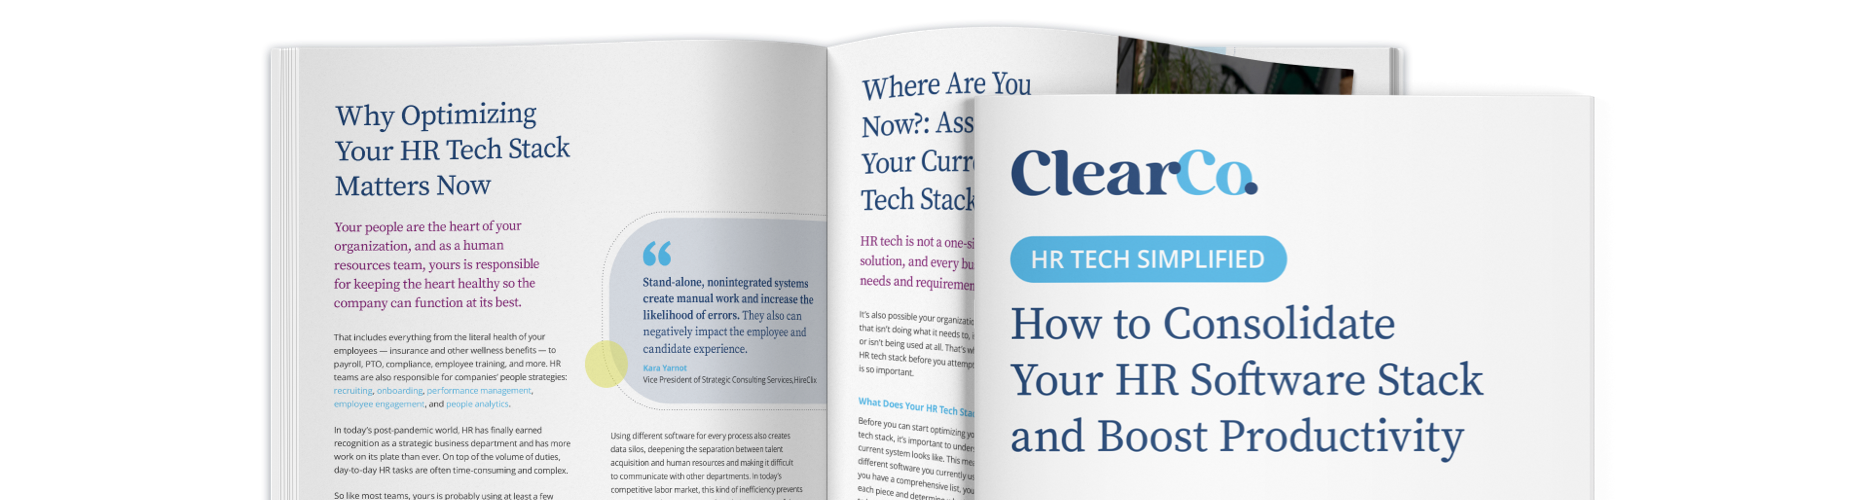 How-to-Consolidate-Your-HR-Software-Stack-and-Boost-Productivity-LP-IMG